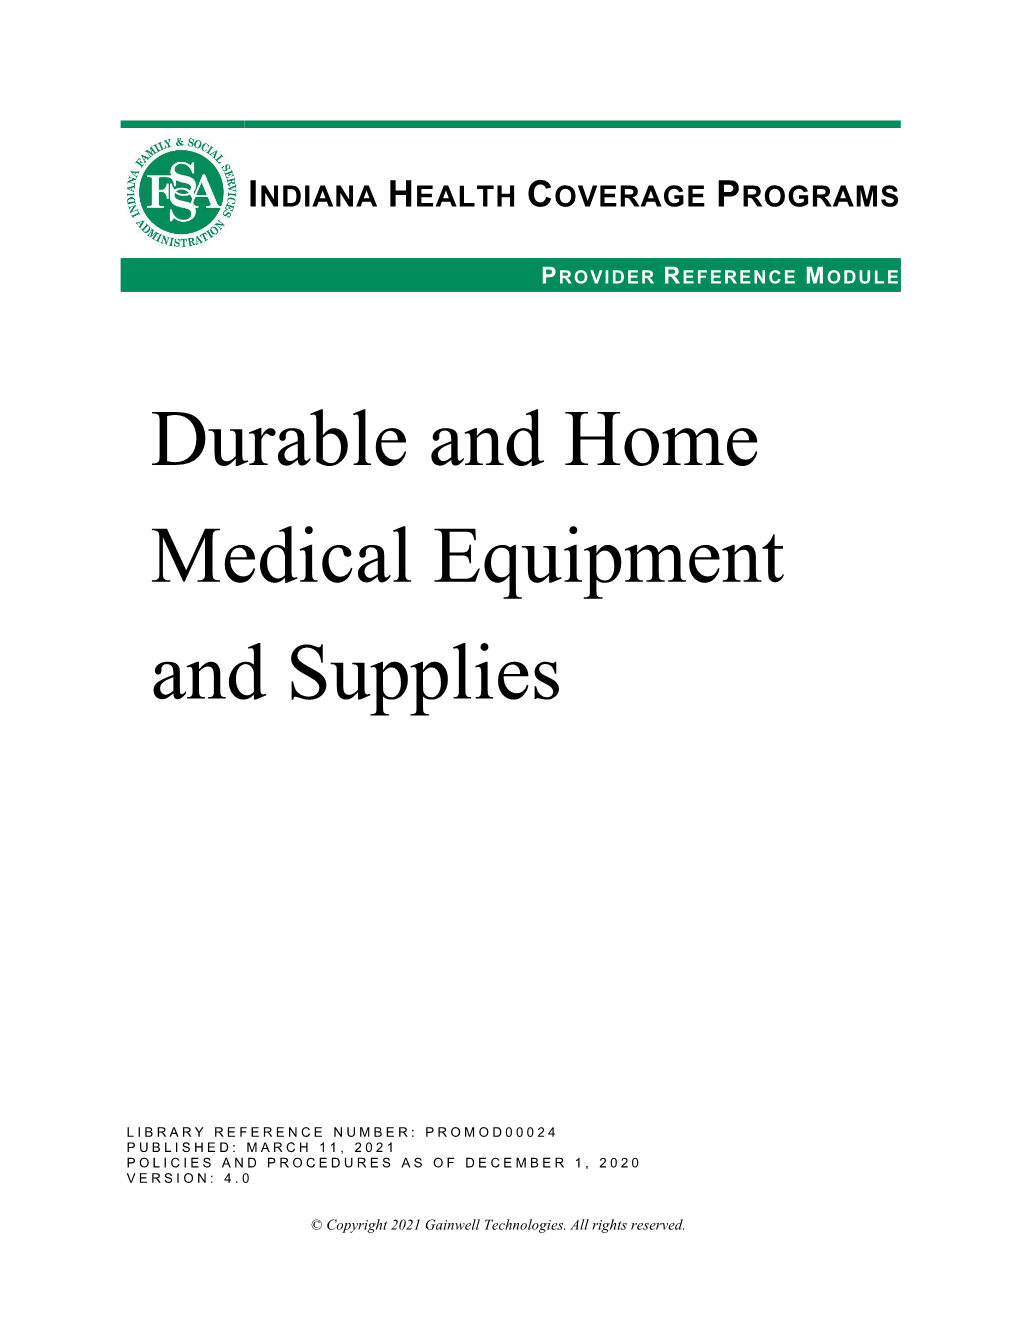 Durable and Home Medical Equipment and Supplies